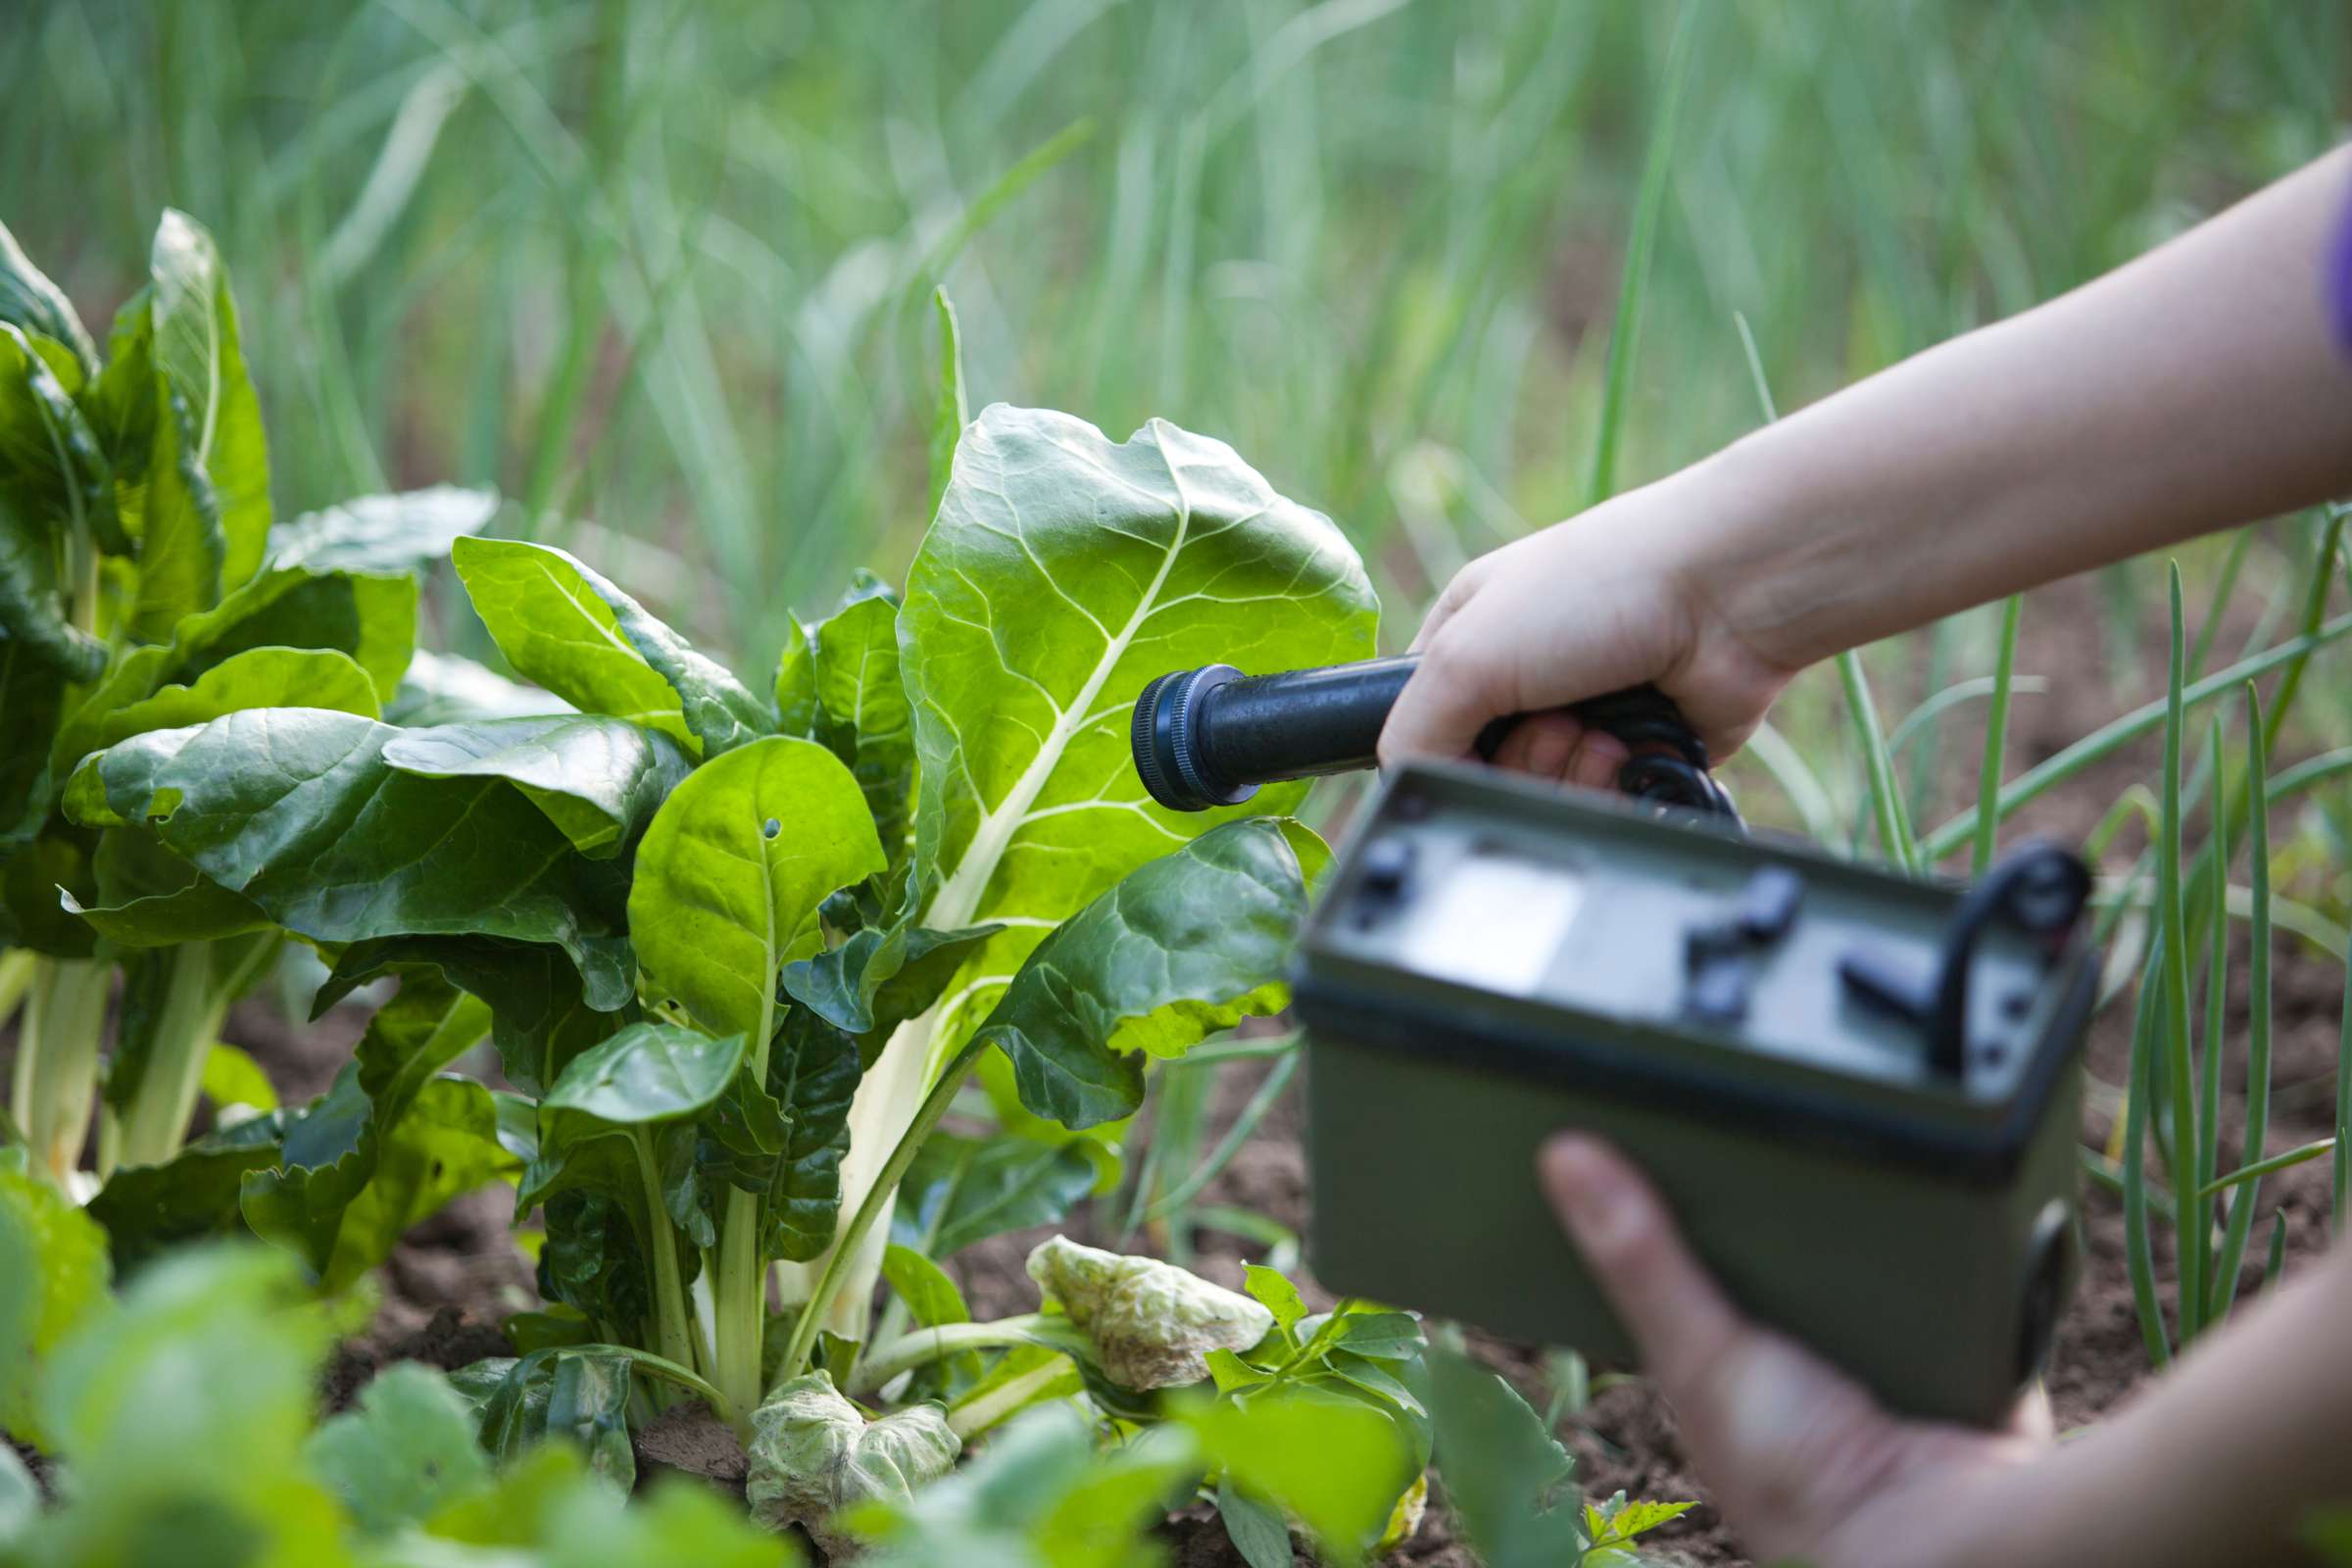 Person uses gauge to measure radiation levels of a vegetable 